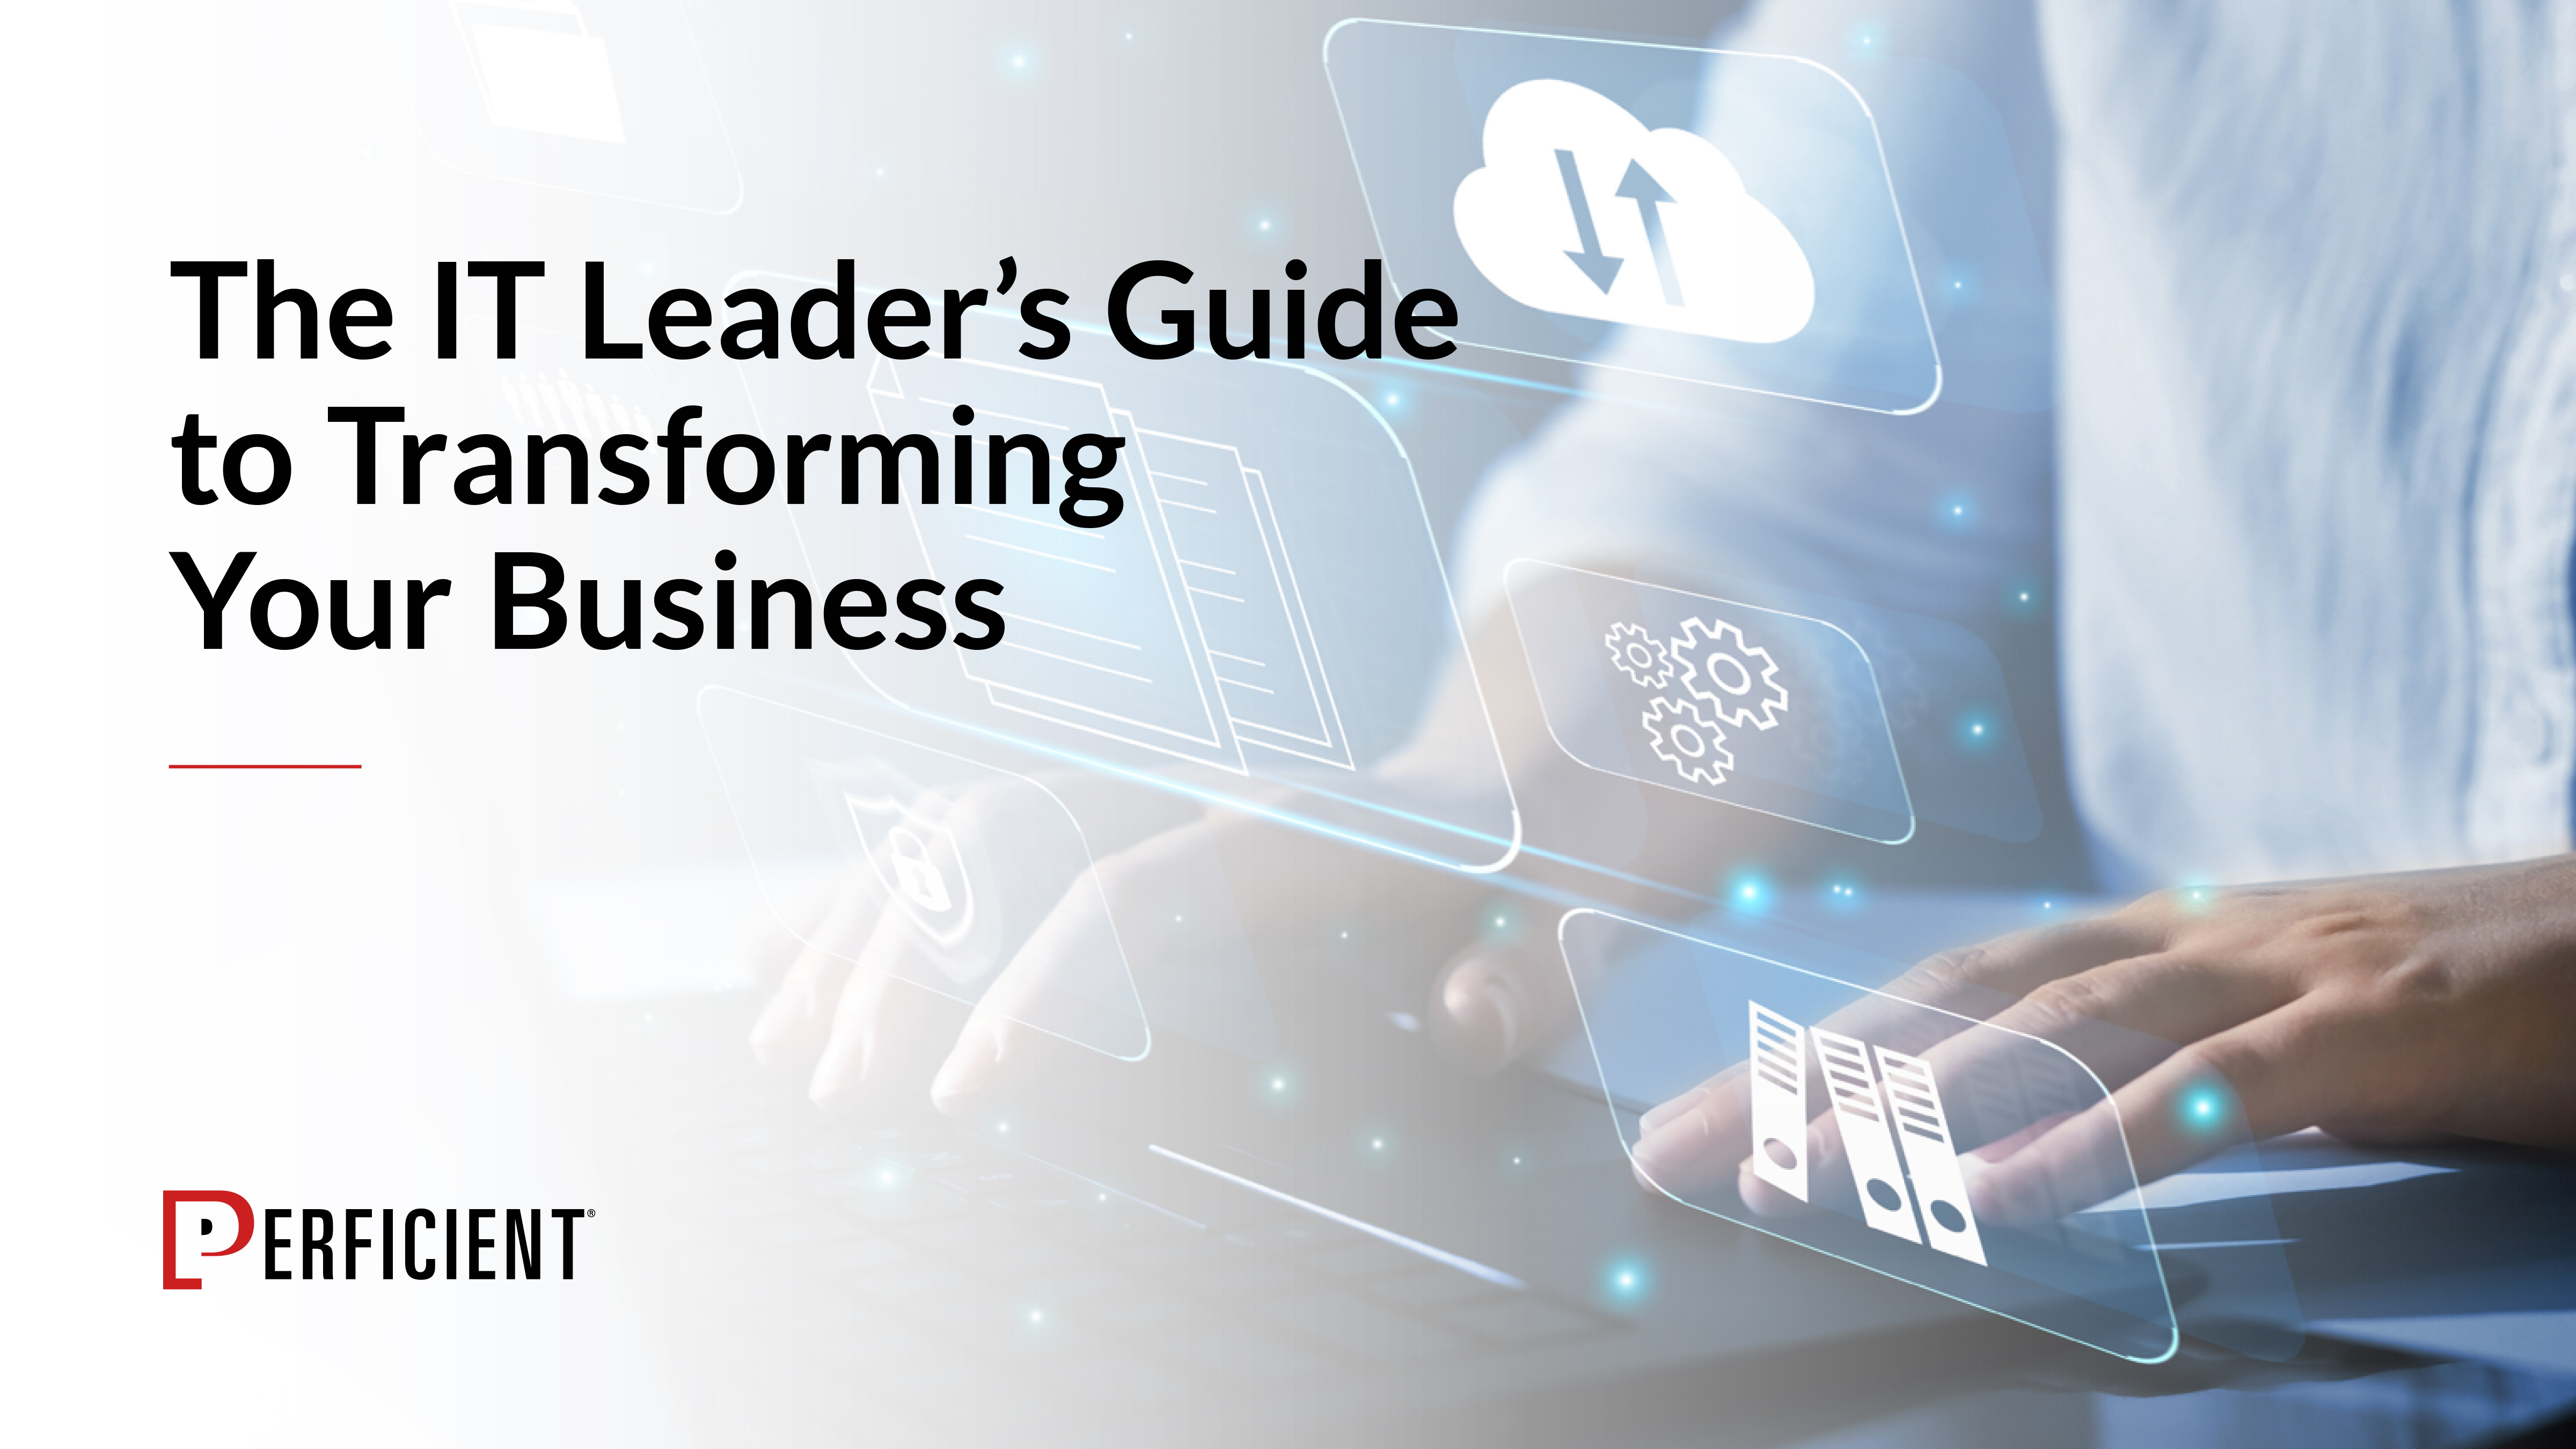 The IT Leader's Guide to Transforming Your Business, guide cover